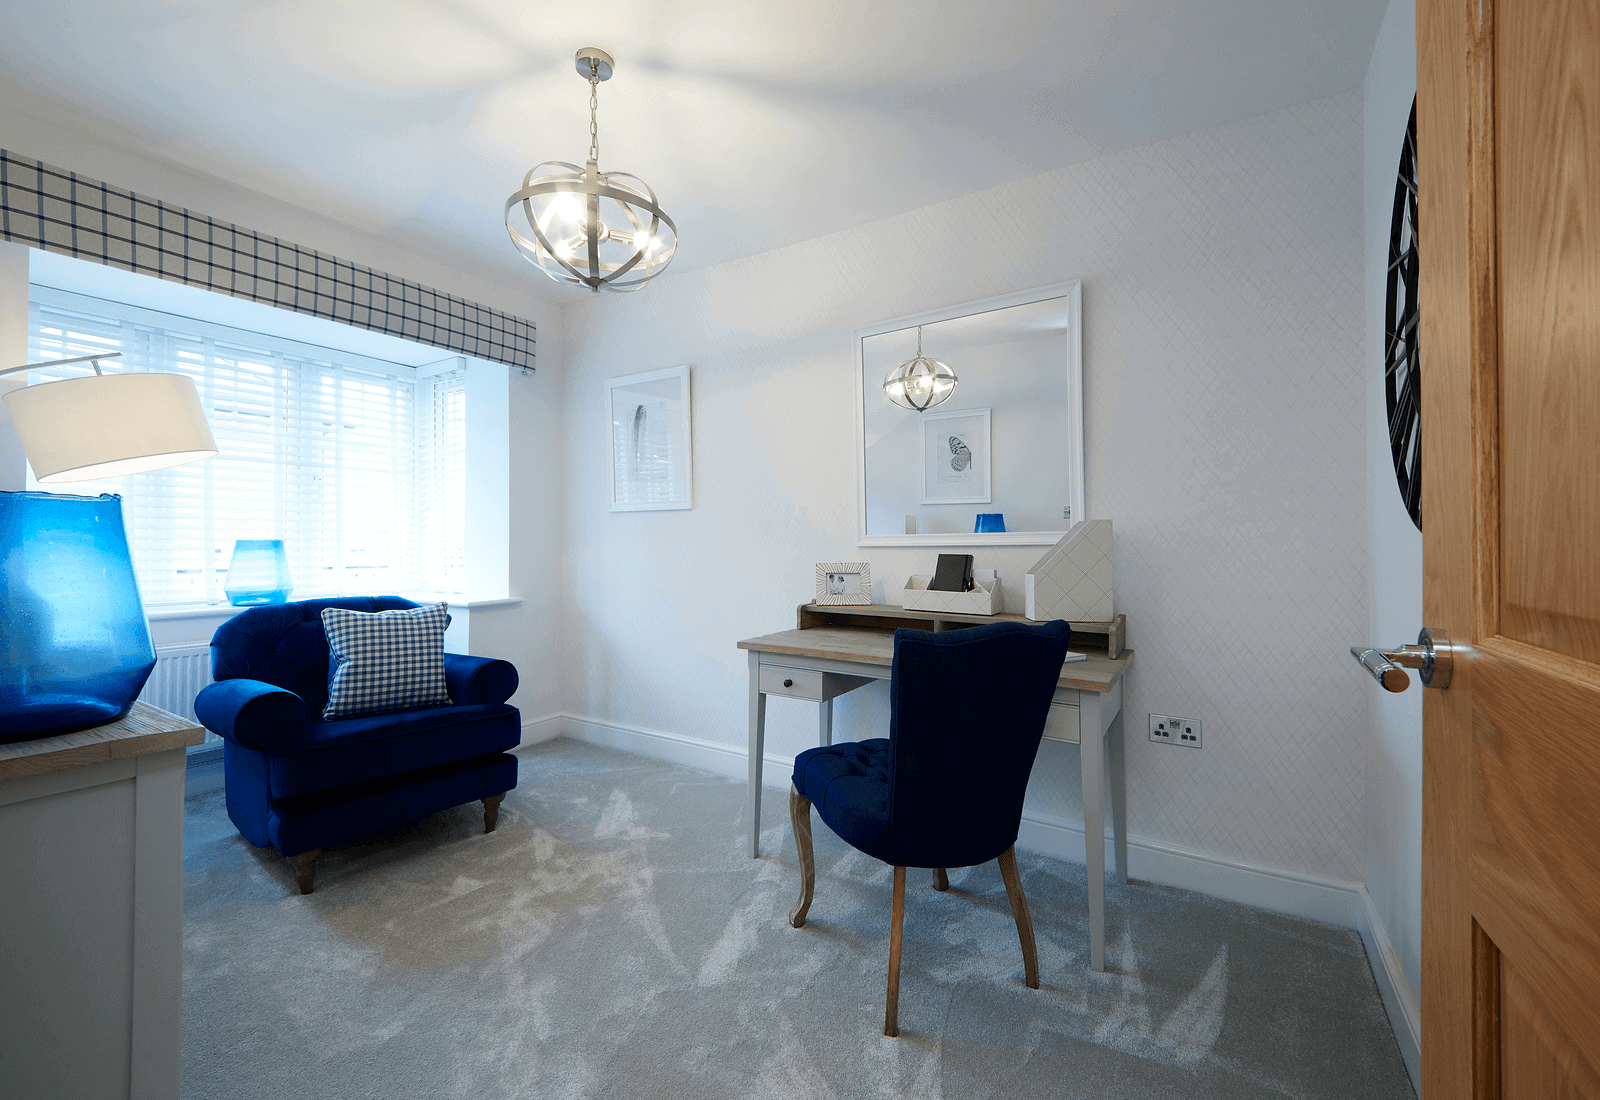 Study in the Bayswater Show Home at St Peter's Park